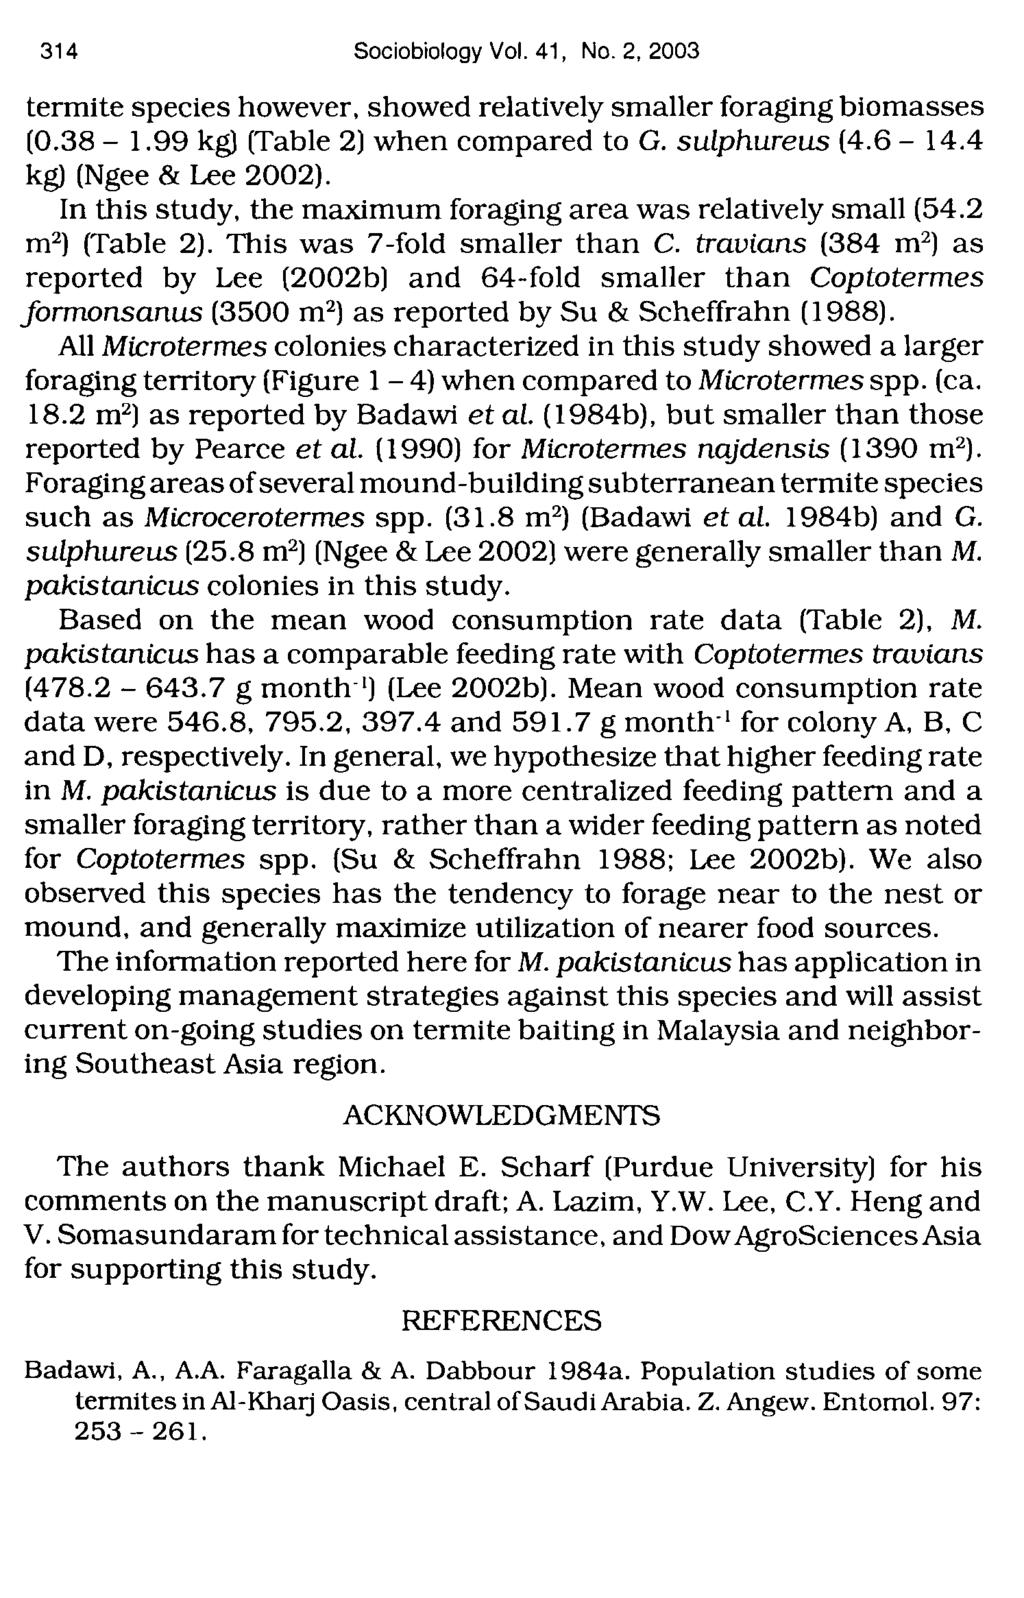 31 4 Sociobiology Vol. 41, No. 2, 2003 termite species however, showed relatively smaller foraging biomasses (0.38-1.99 kg) (Table 2) when compared to G. sulphureus (4.6-14.4 kg) (Ngee & Lee 2002).